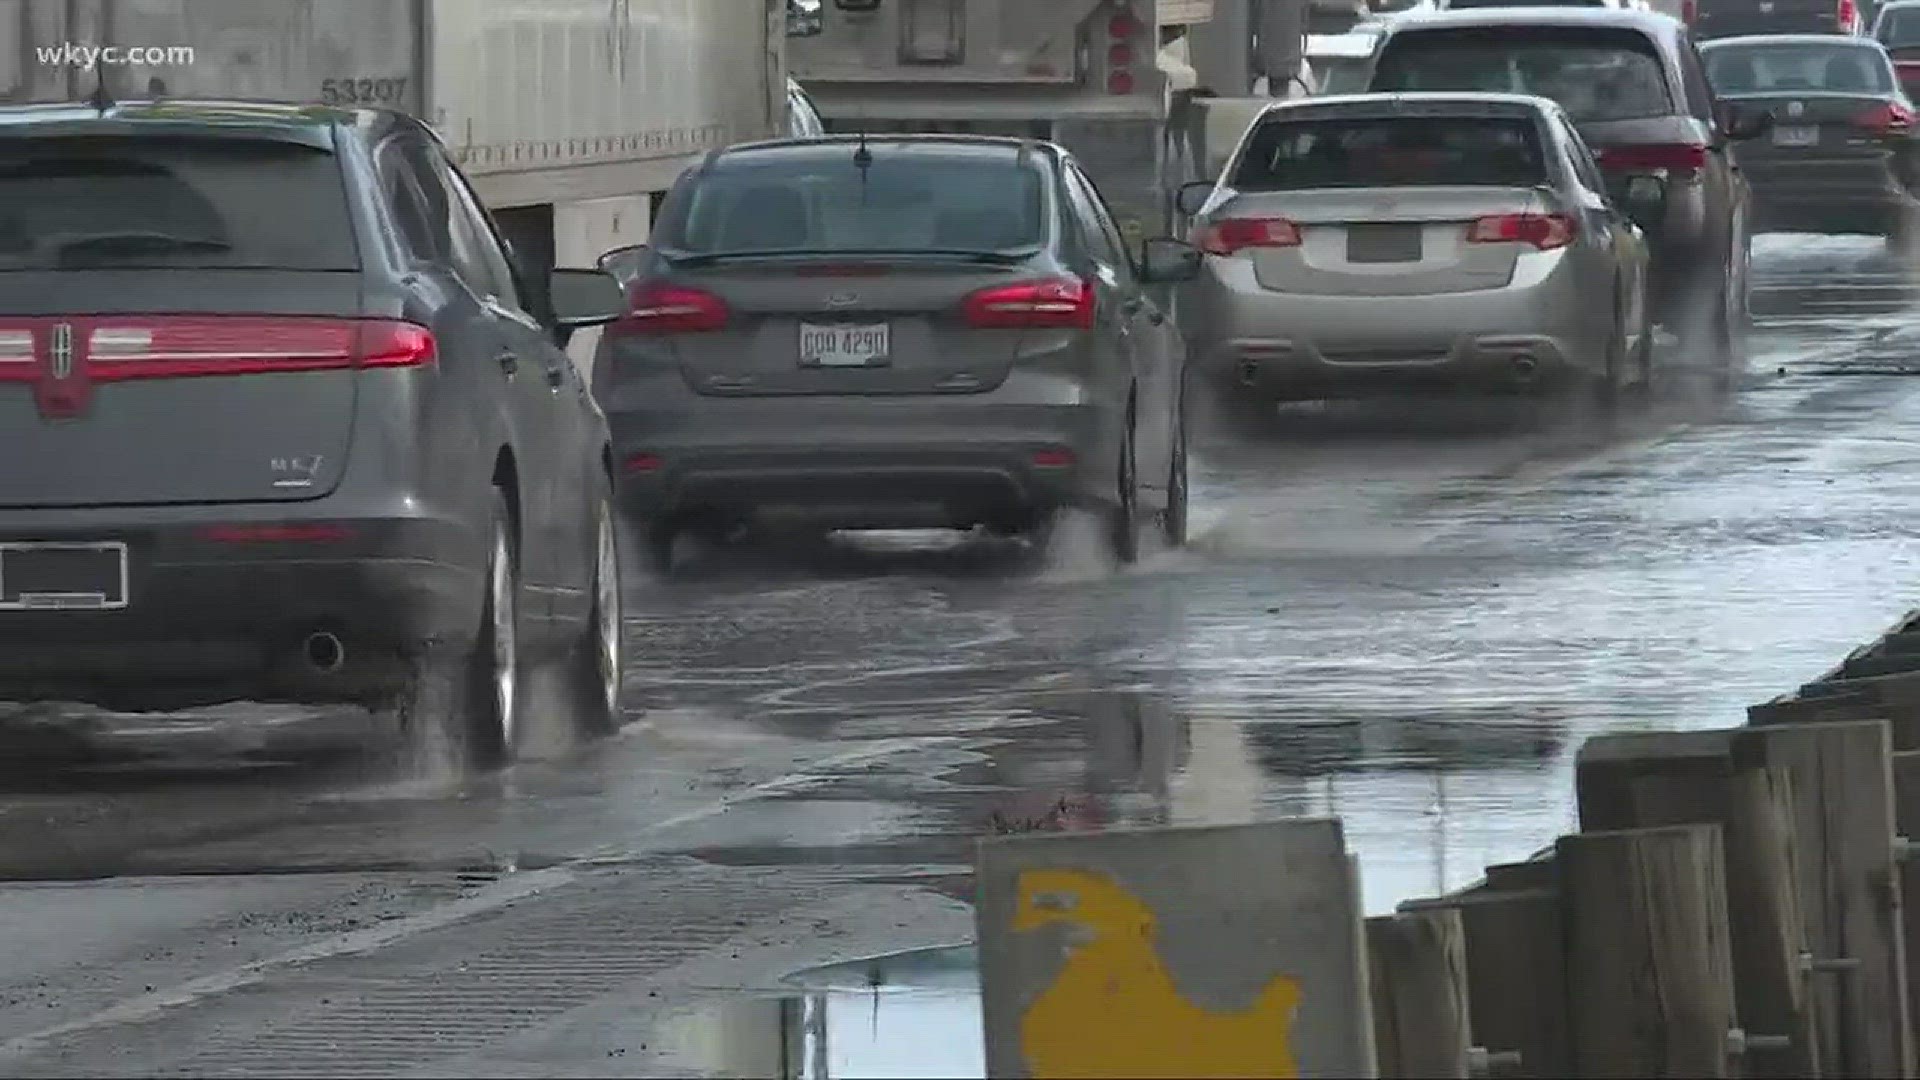 Flooding on I-90 is a continuous problem